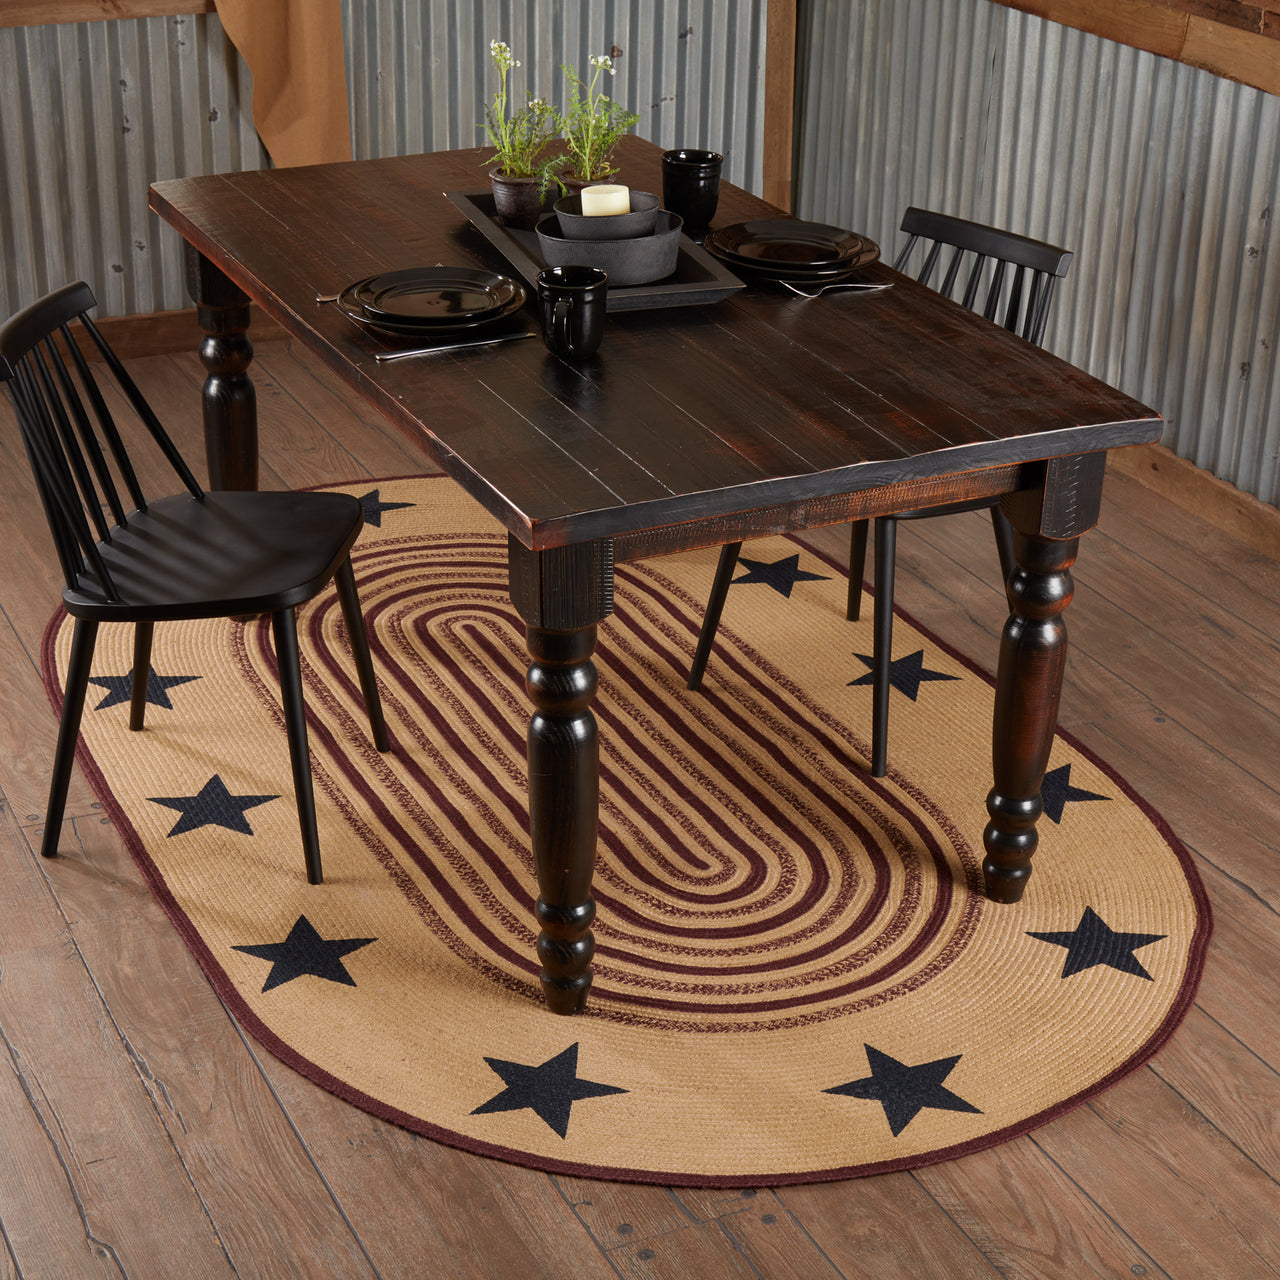 Potomac Jute Braided Rug Oval Stencil Stars 5'x8' with Rug Pad VHC Brands